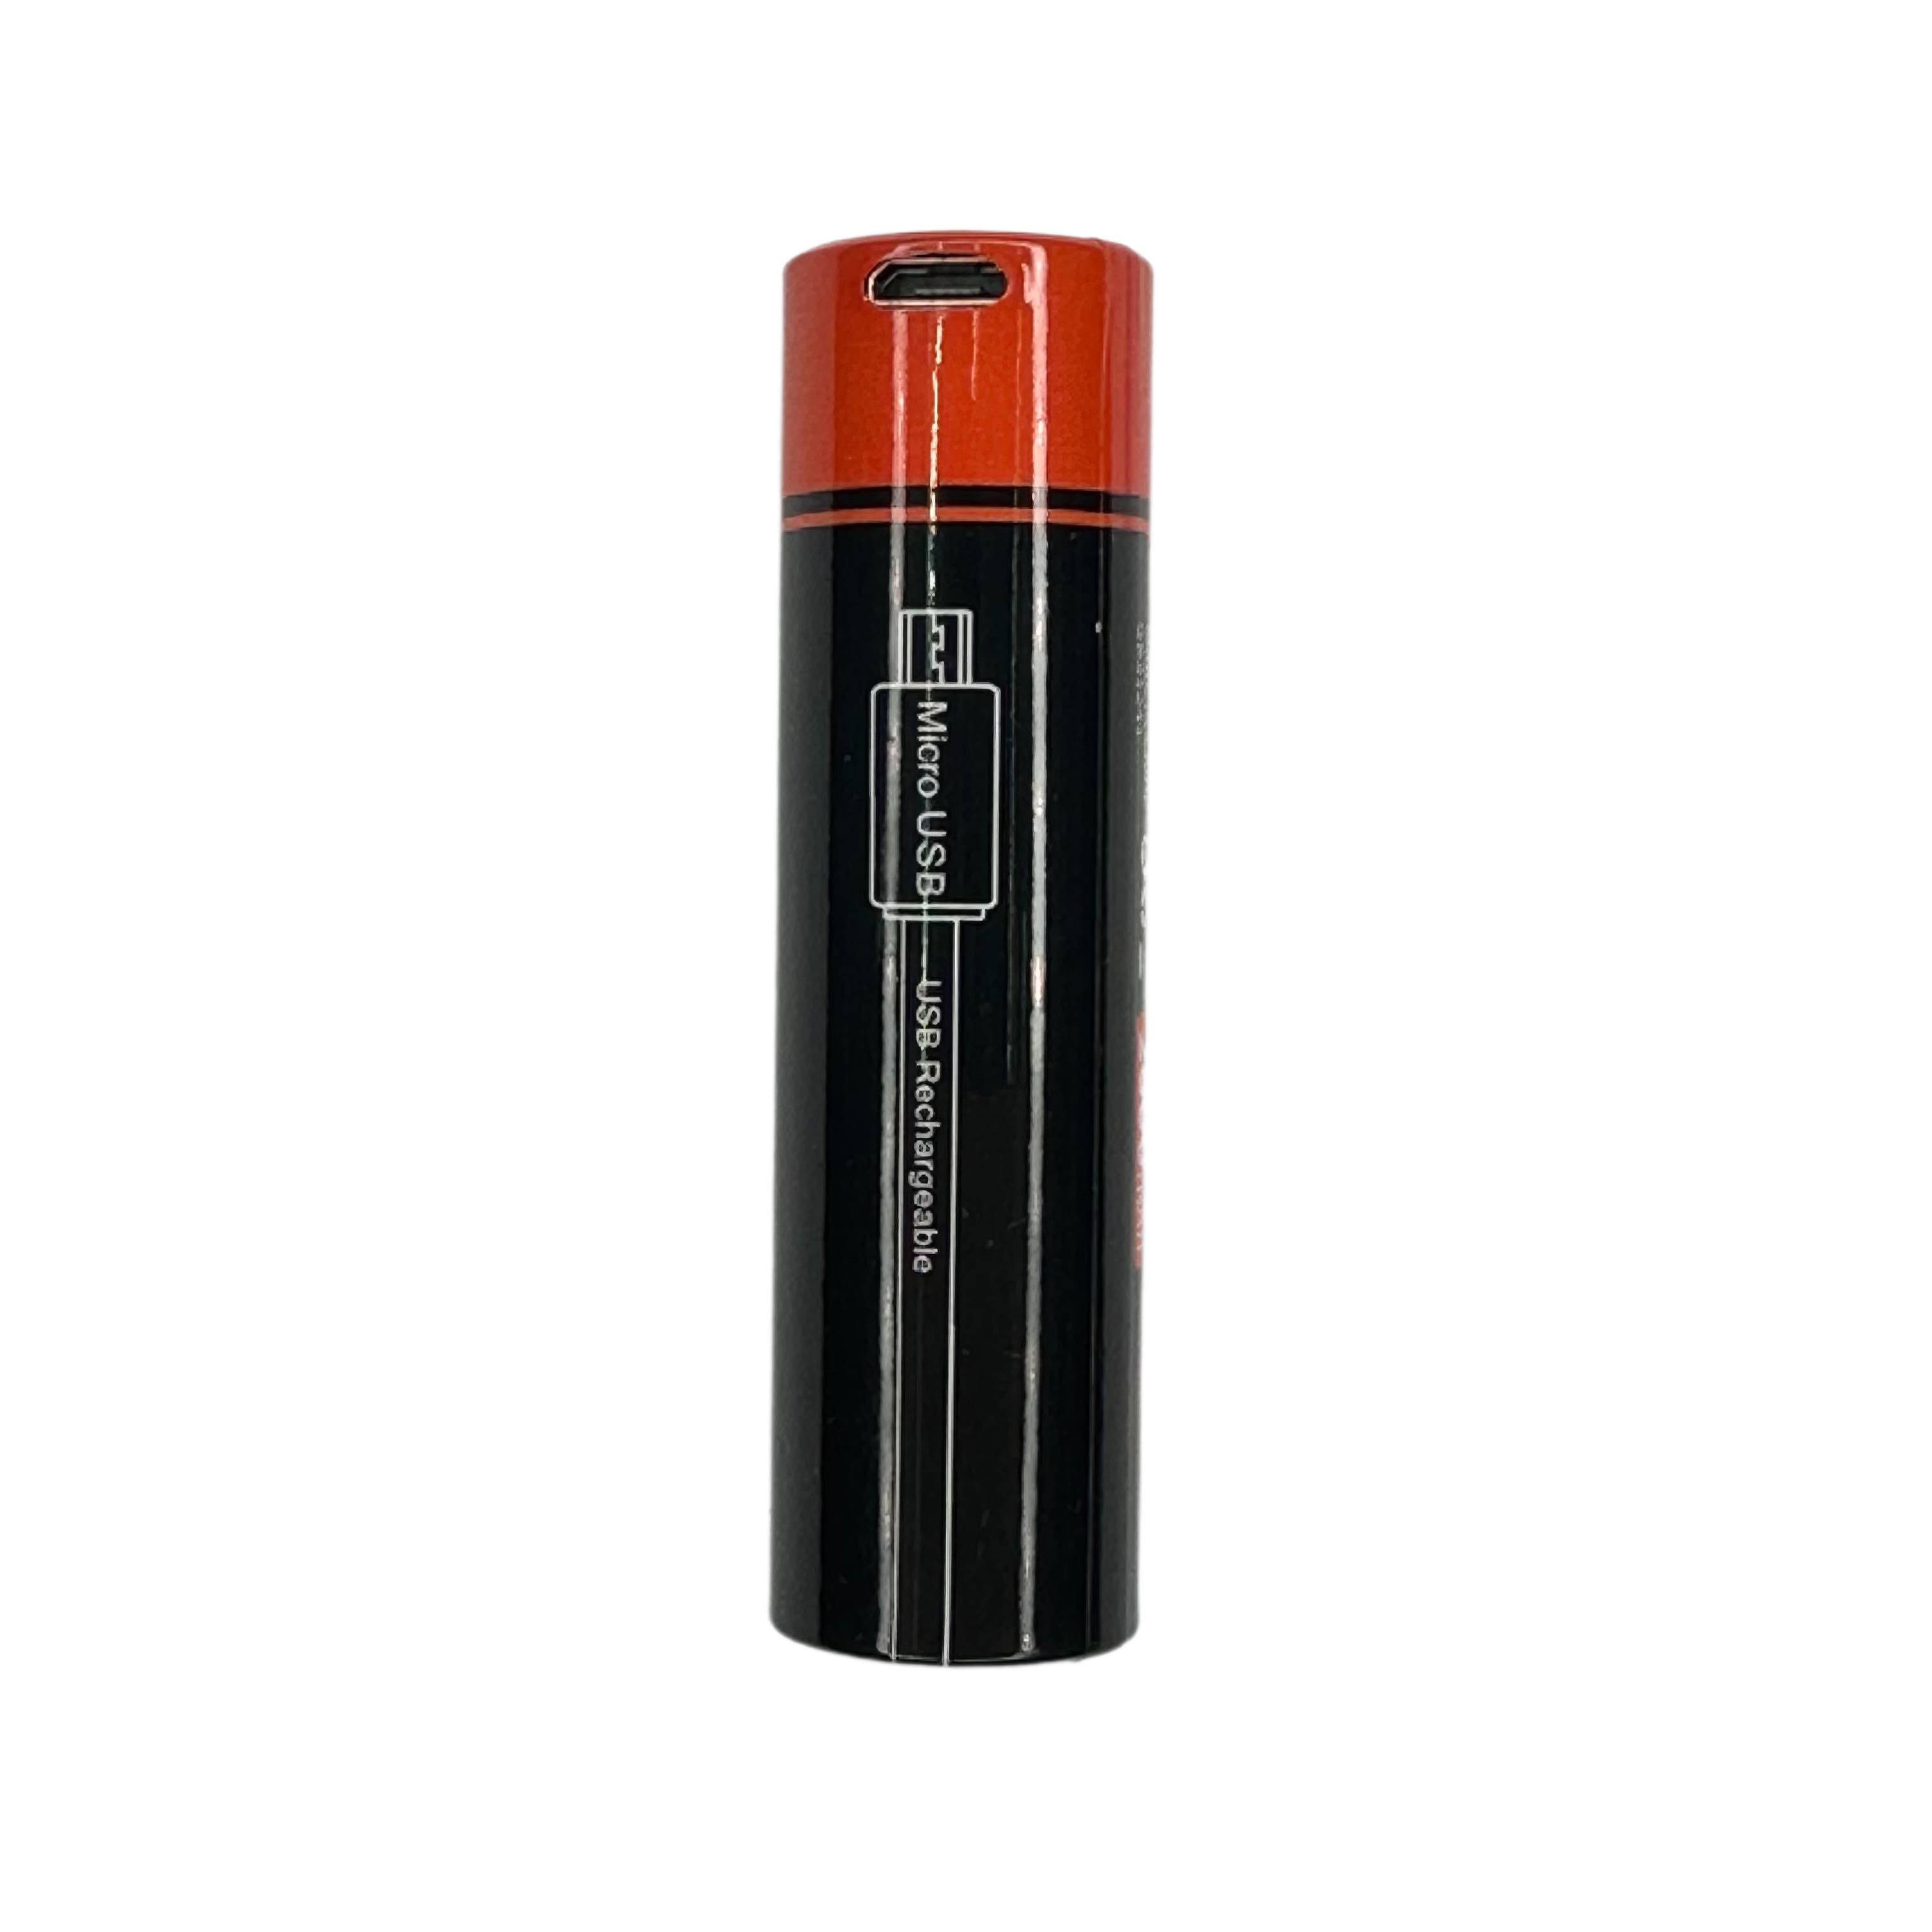 Rechargeable 18650 USB Lithium Ion Battery